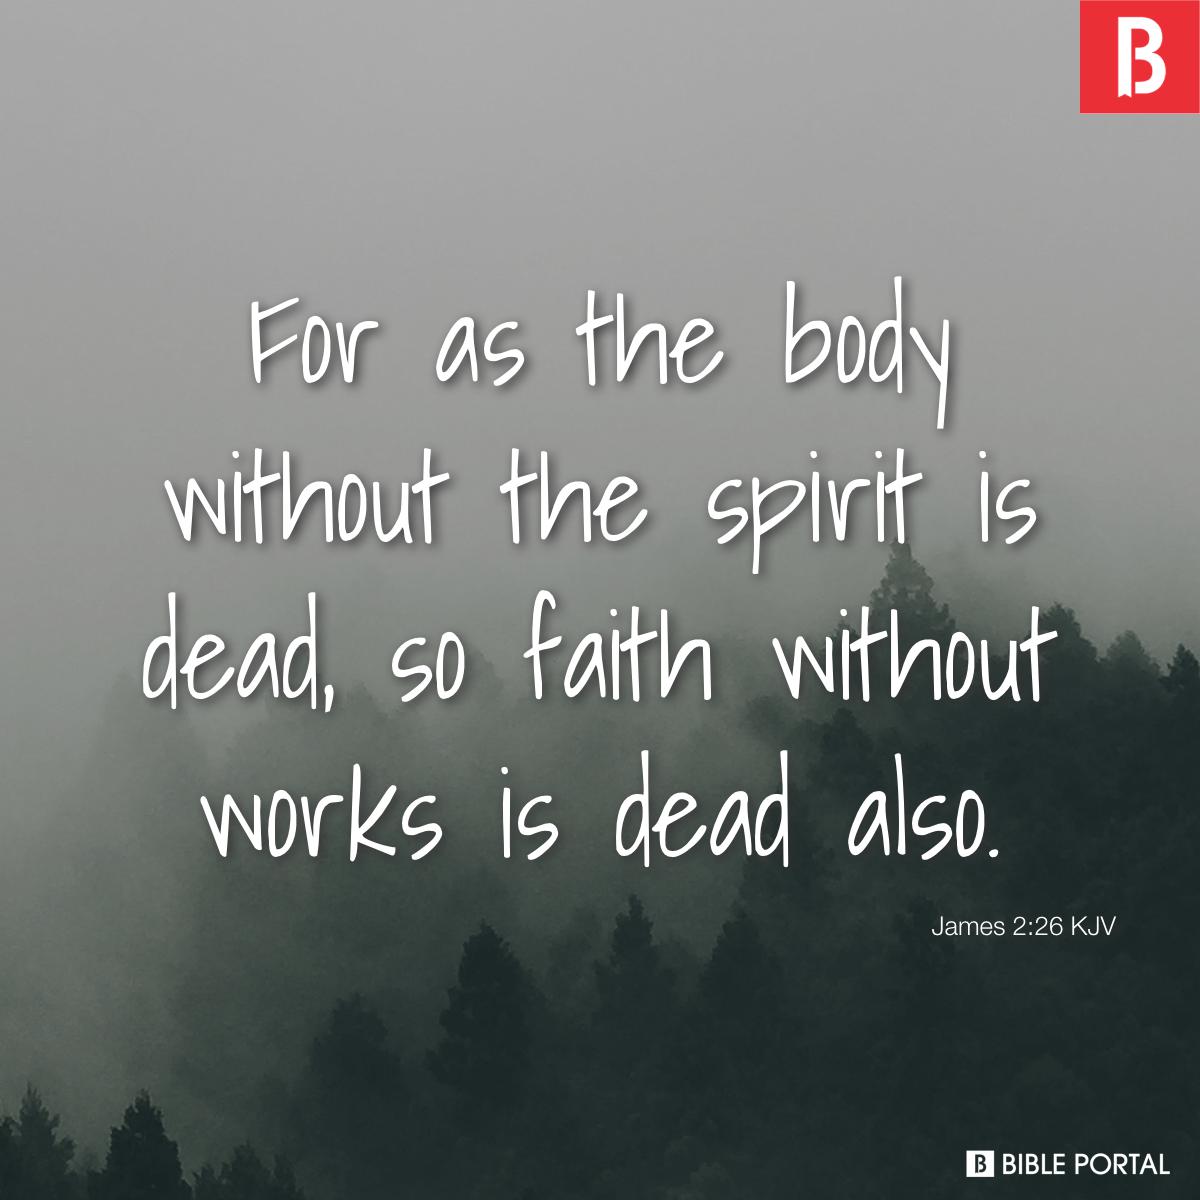 james226-for-as-the-body-without-the-spirit-is-dead-so-faith-without-works-KJV-4109-0